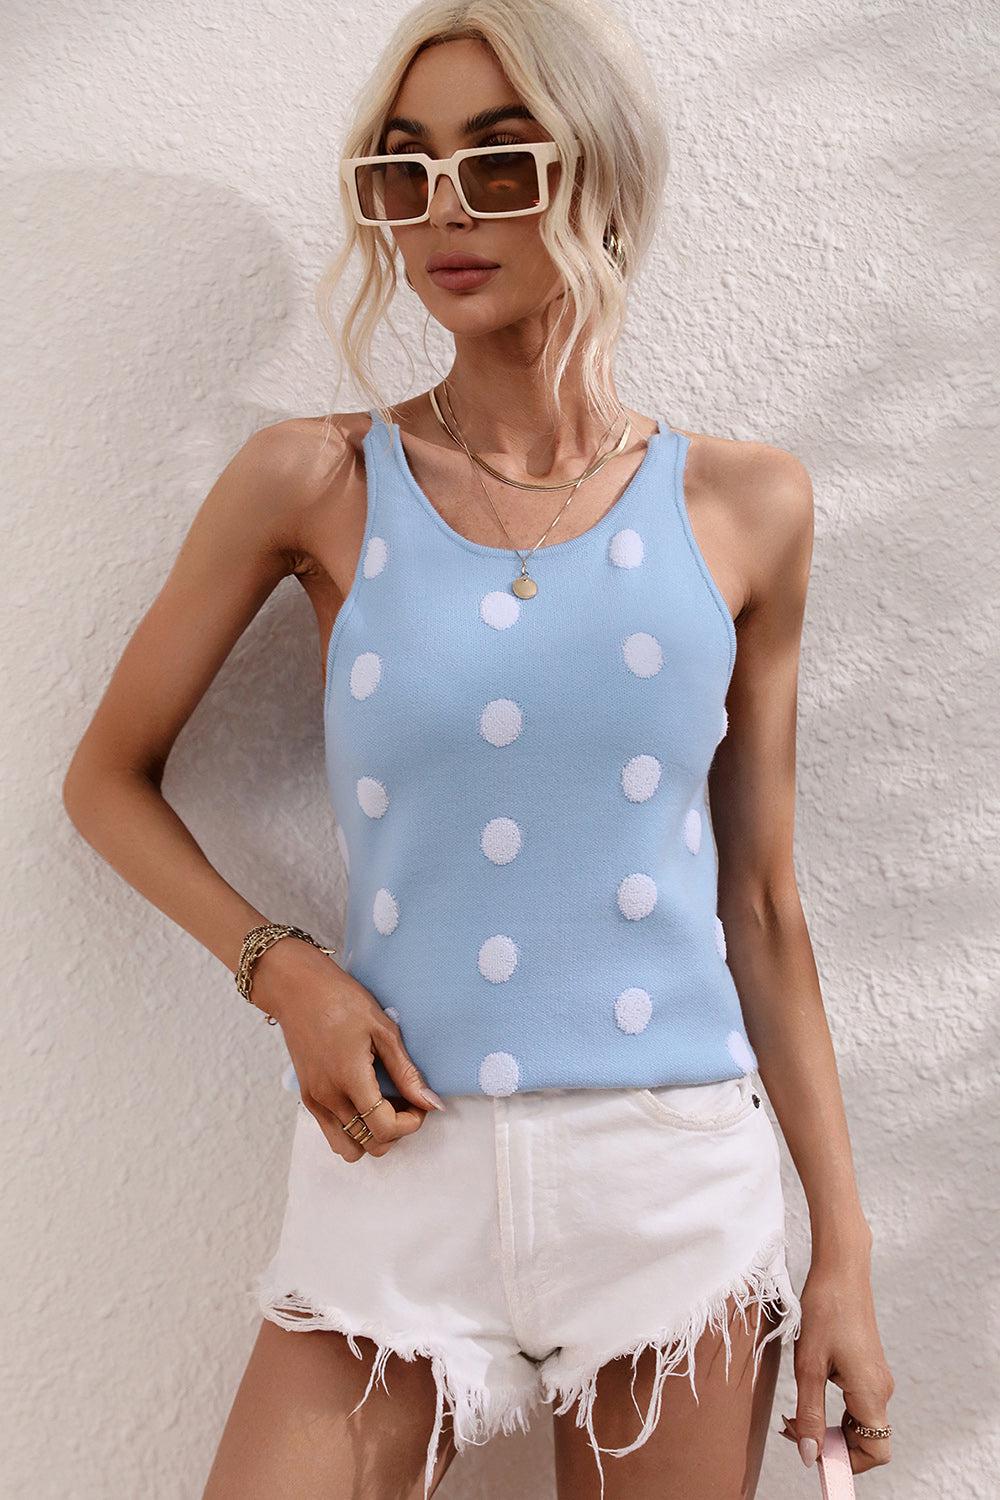 a woman wearing a blue tank top with white polka dots